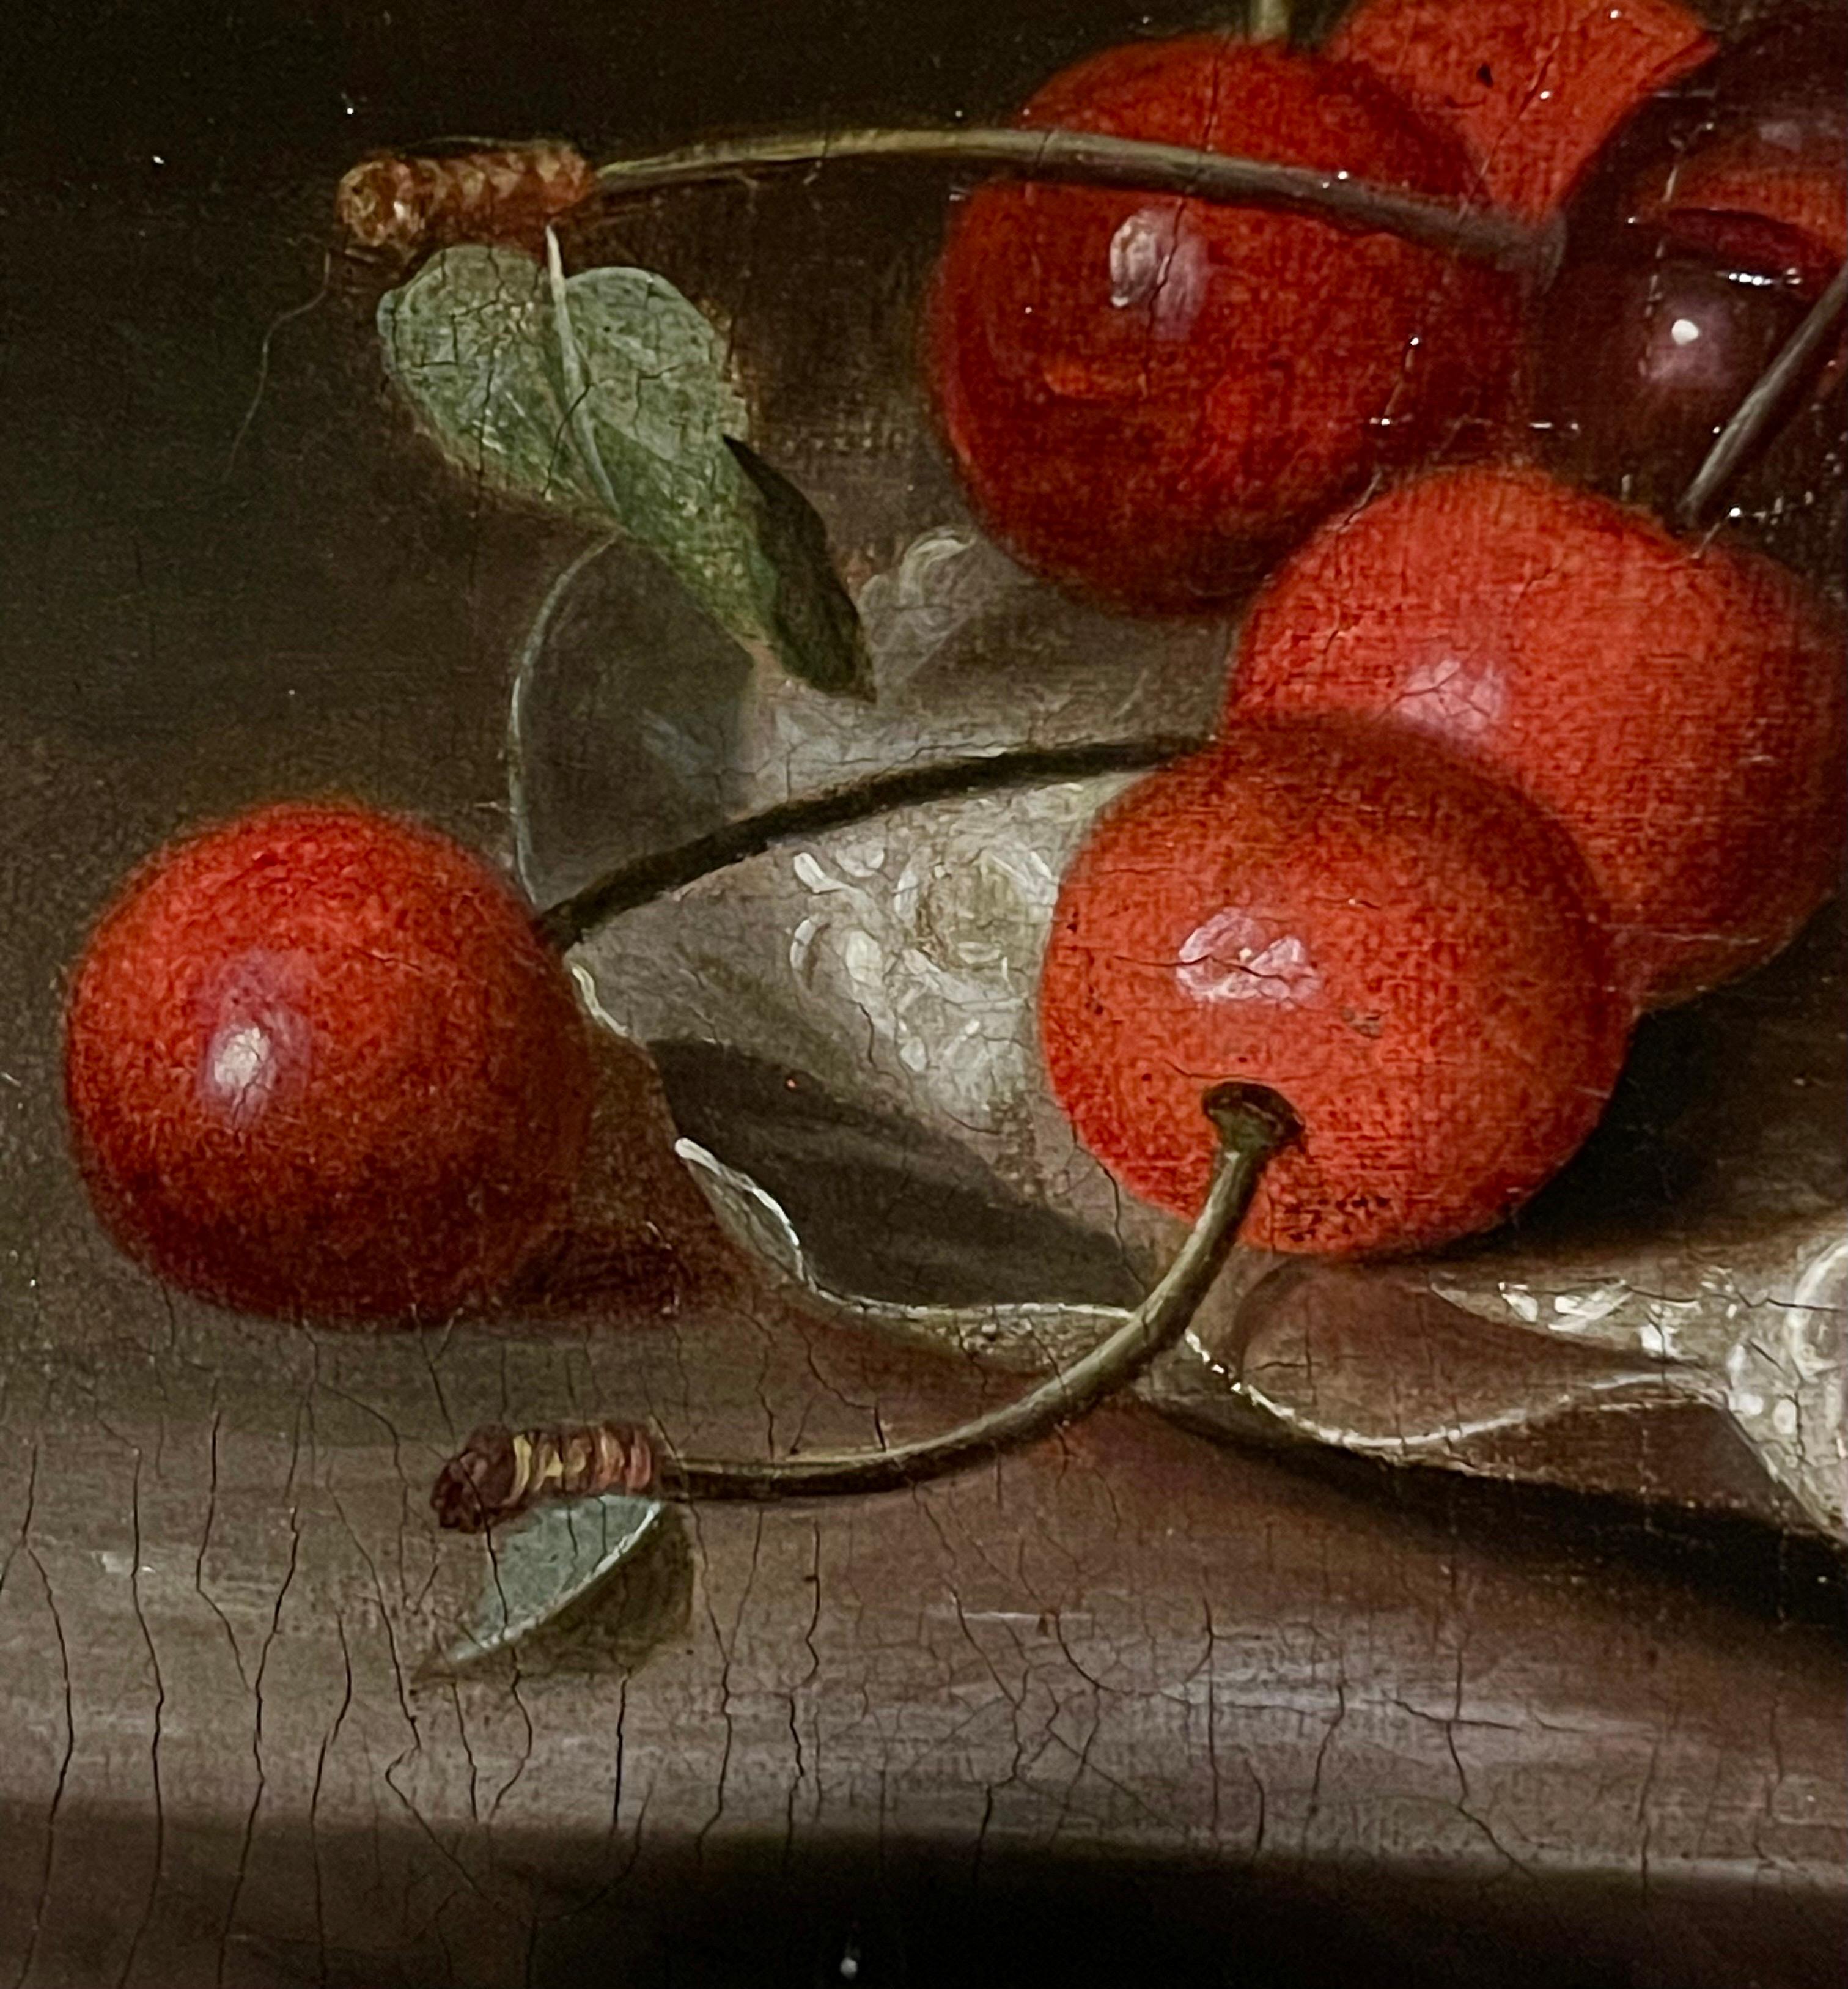 17th century Still-life Fruit on a plate with peaches, cherries and butterflies - Black Still-Life Painting by Jakob Bogdani